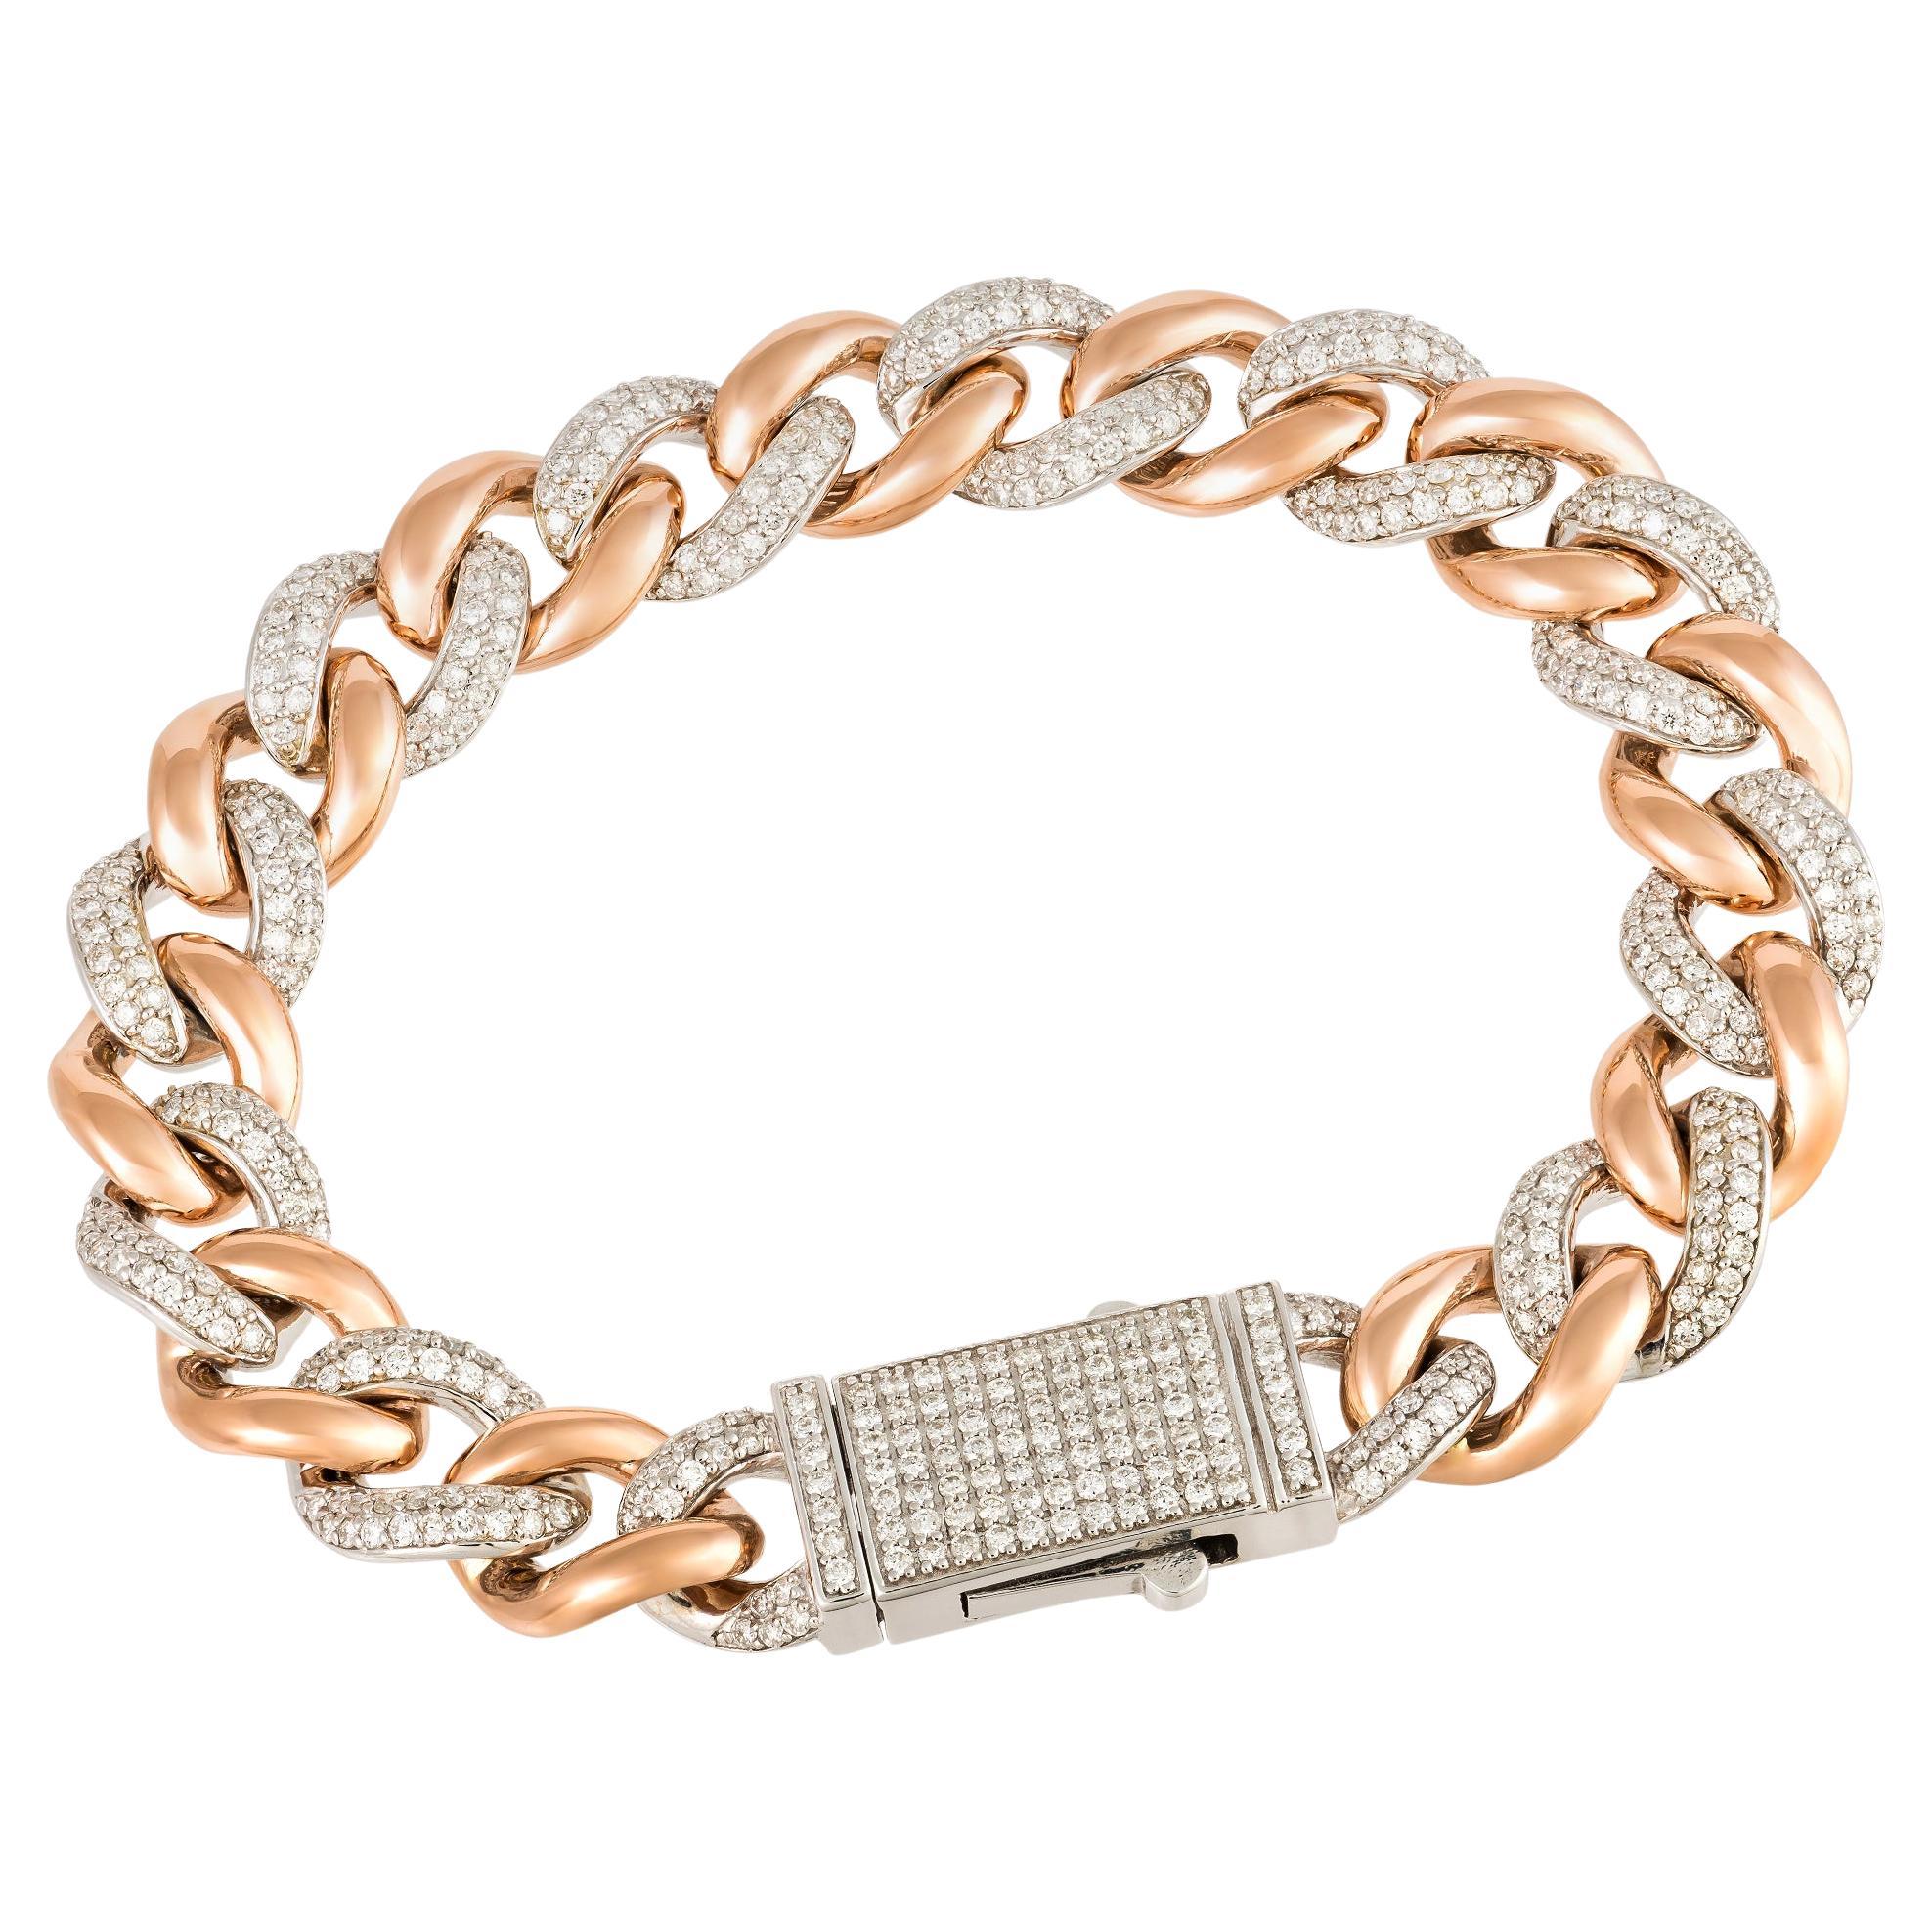 Chain Unique White Pink Gold 18K Bracelet Diamond for Her For Sale